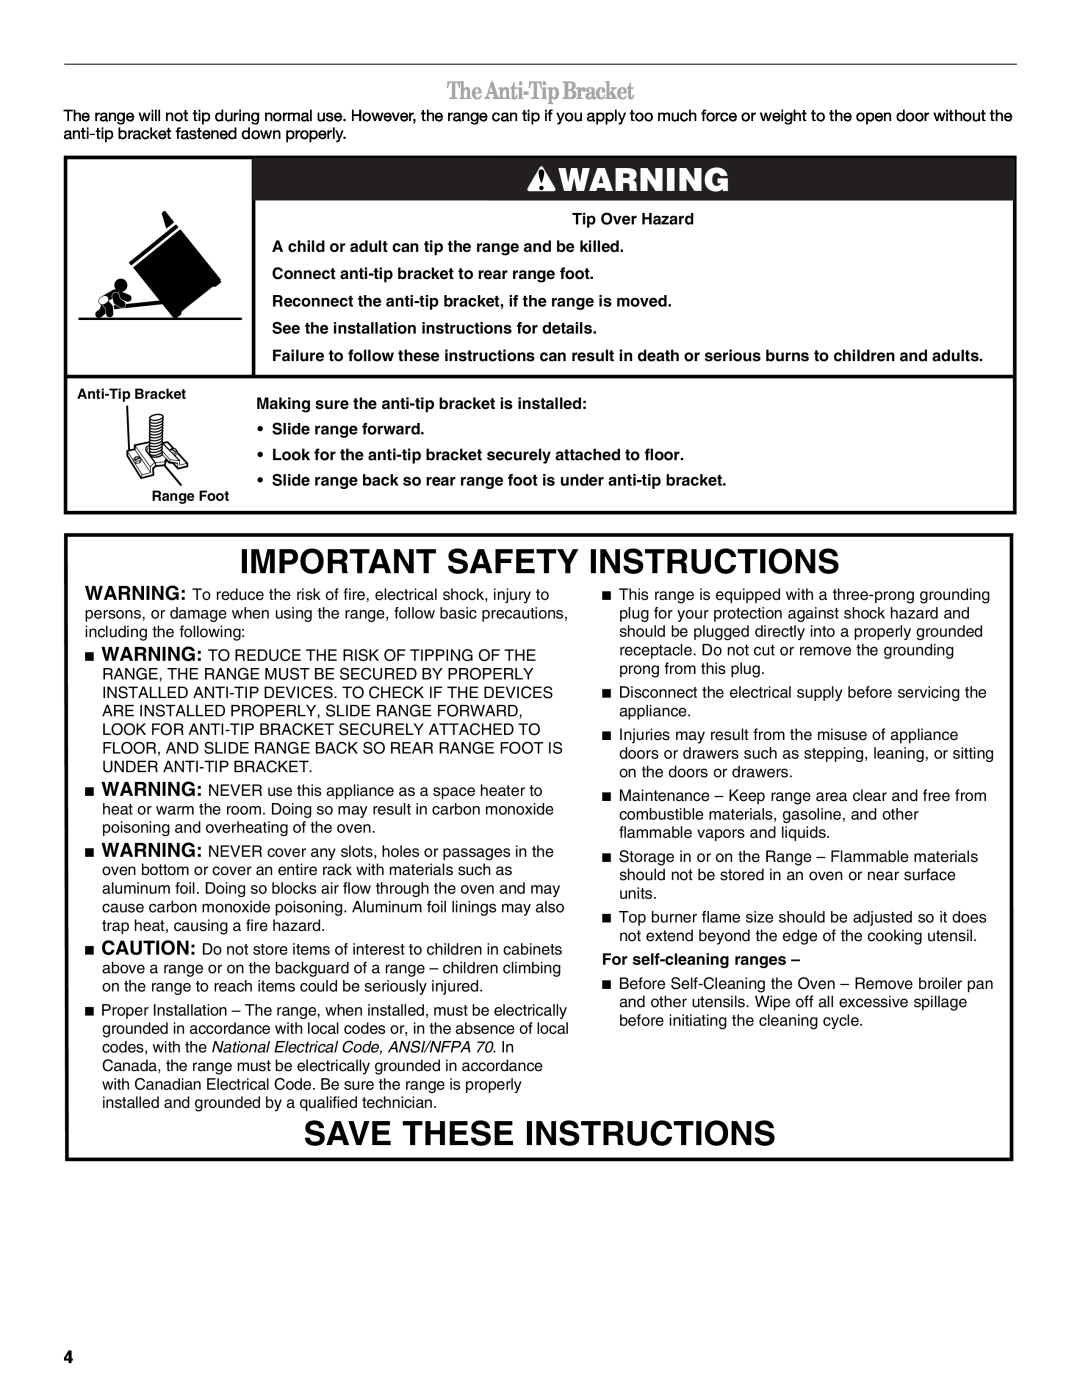 Whirlpool W10099470 Important Safety Instructions, Save These Instructions, TheAnti-TipBracket, For self-cleaning ranges 